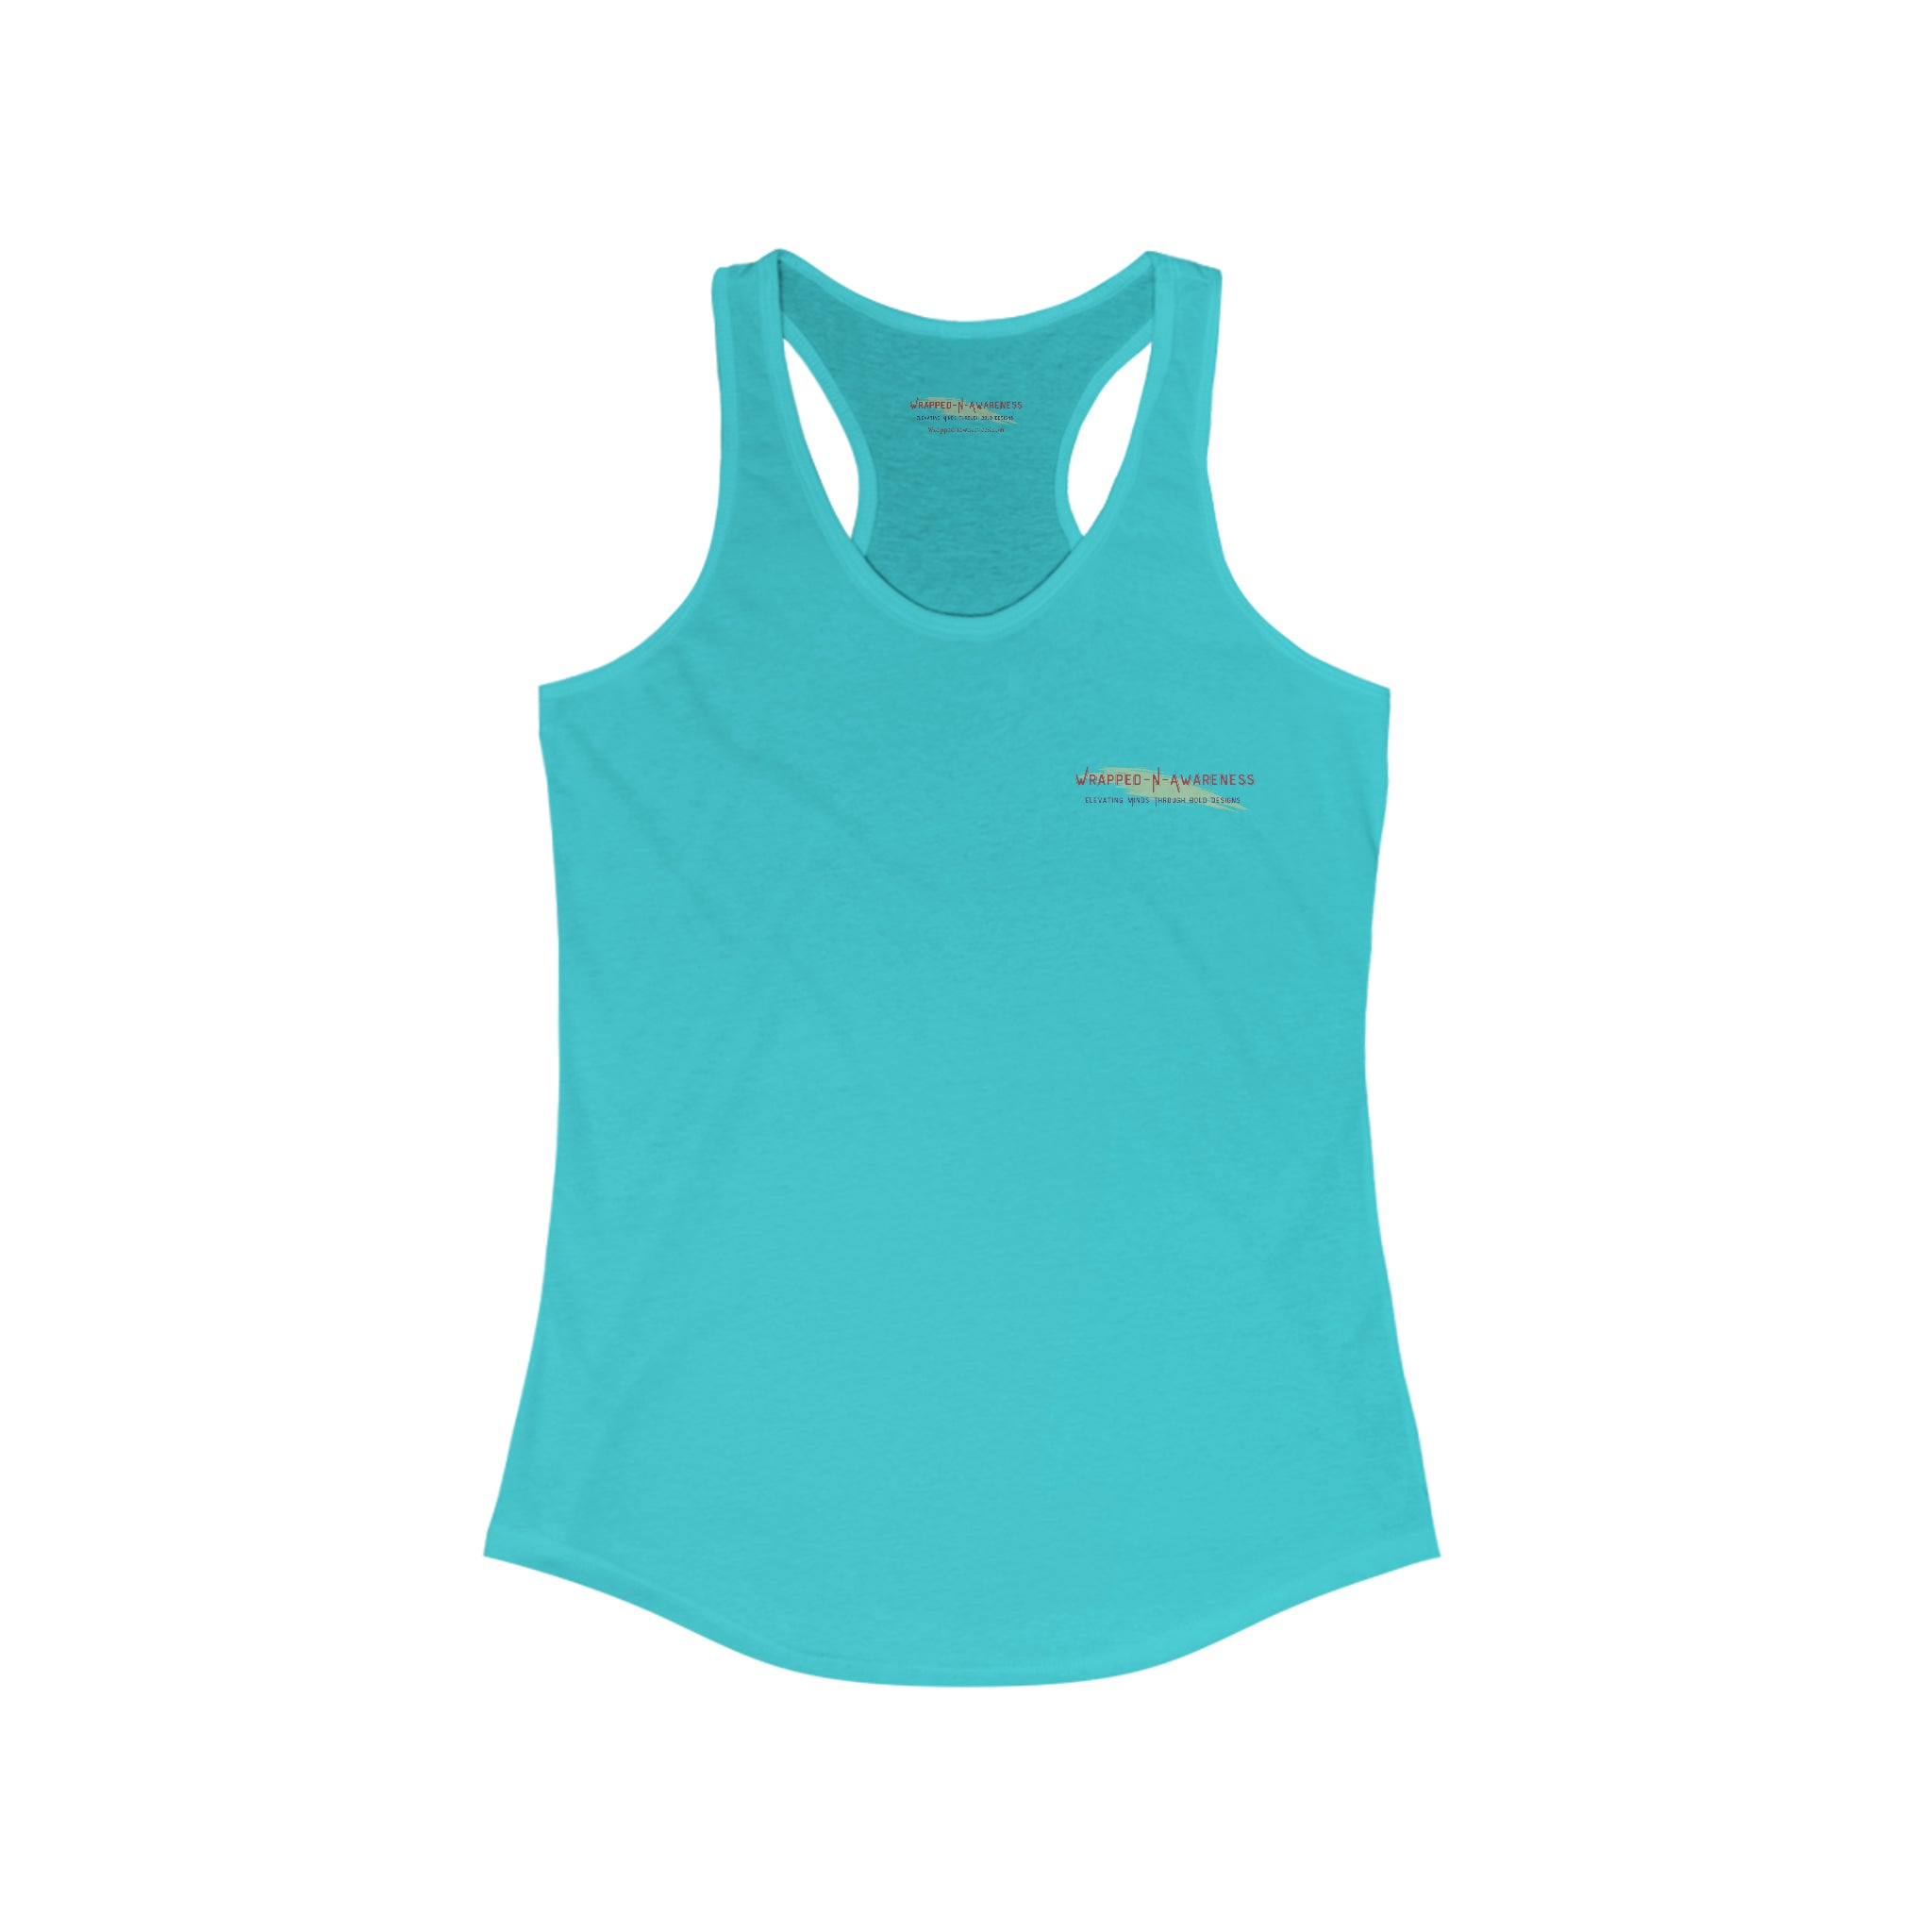 Racerback Courage Tank: Join the movement! Solid Warm Gray Activewear Athletic Tank Fitness Wear Gym Clothes Performance Tank Racerback Racerback Tee Sleeveless Top Sporty Apparel Stylish Racerback Summer Tank Tank Top Women's Tank Workout Gear Yoga Tank Tank Top 6856652945601424407_2048_0b3f4123-b4cb-46eb-b26b-590e9a39785f Printify